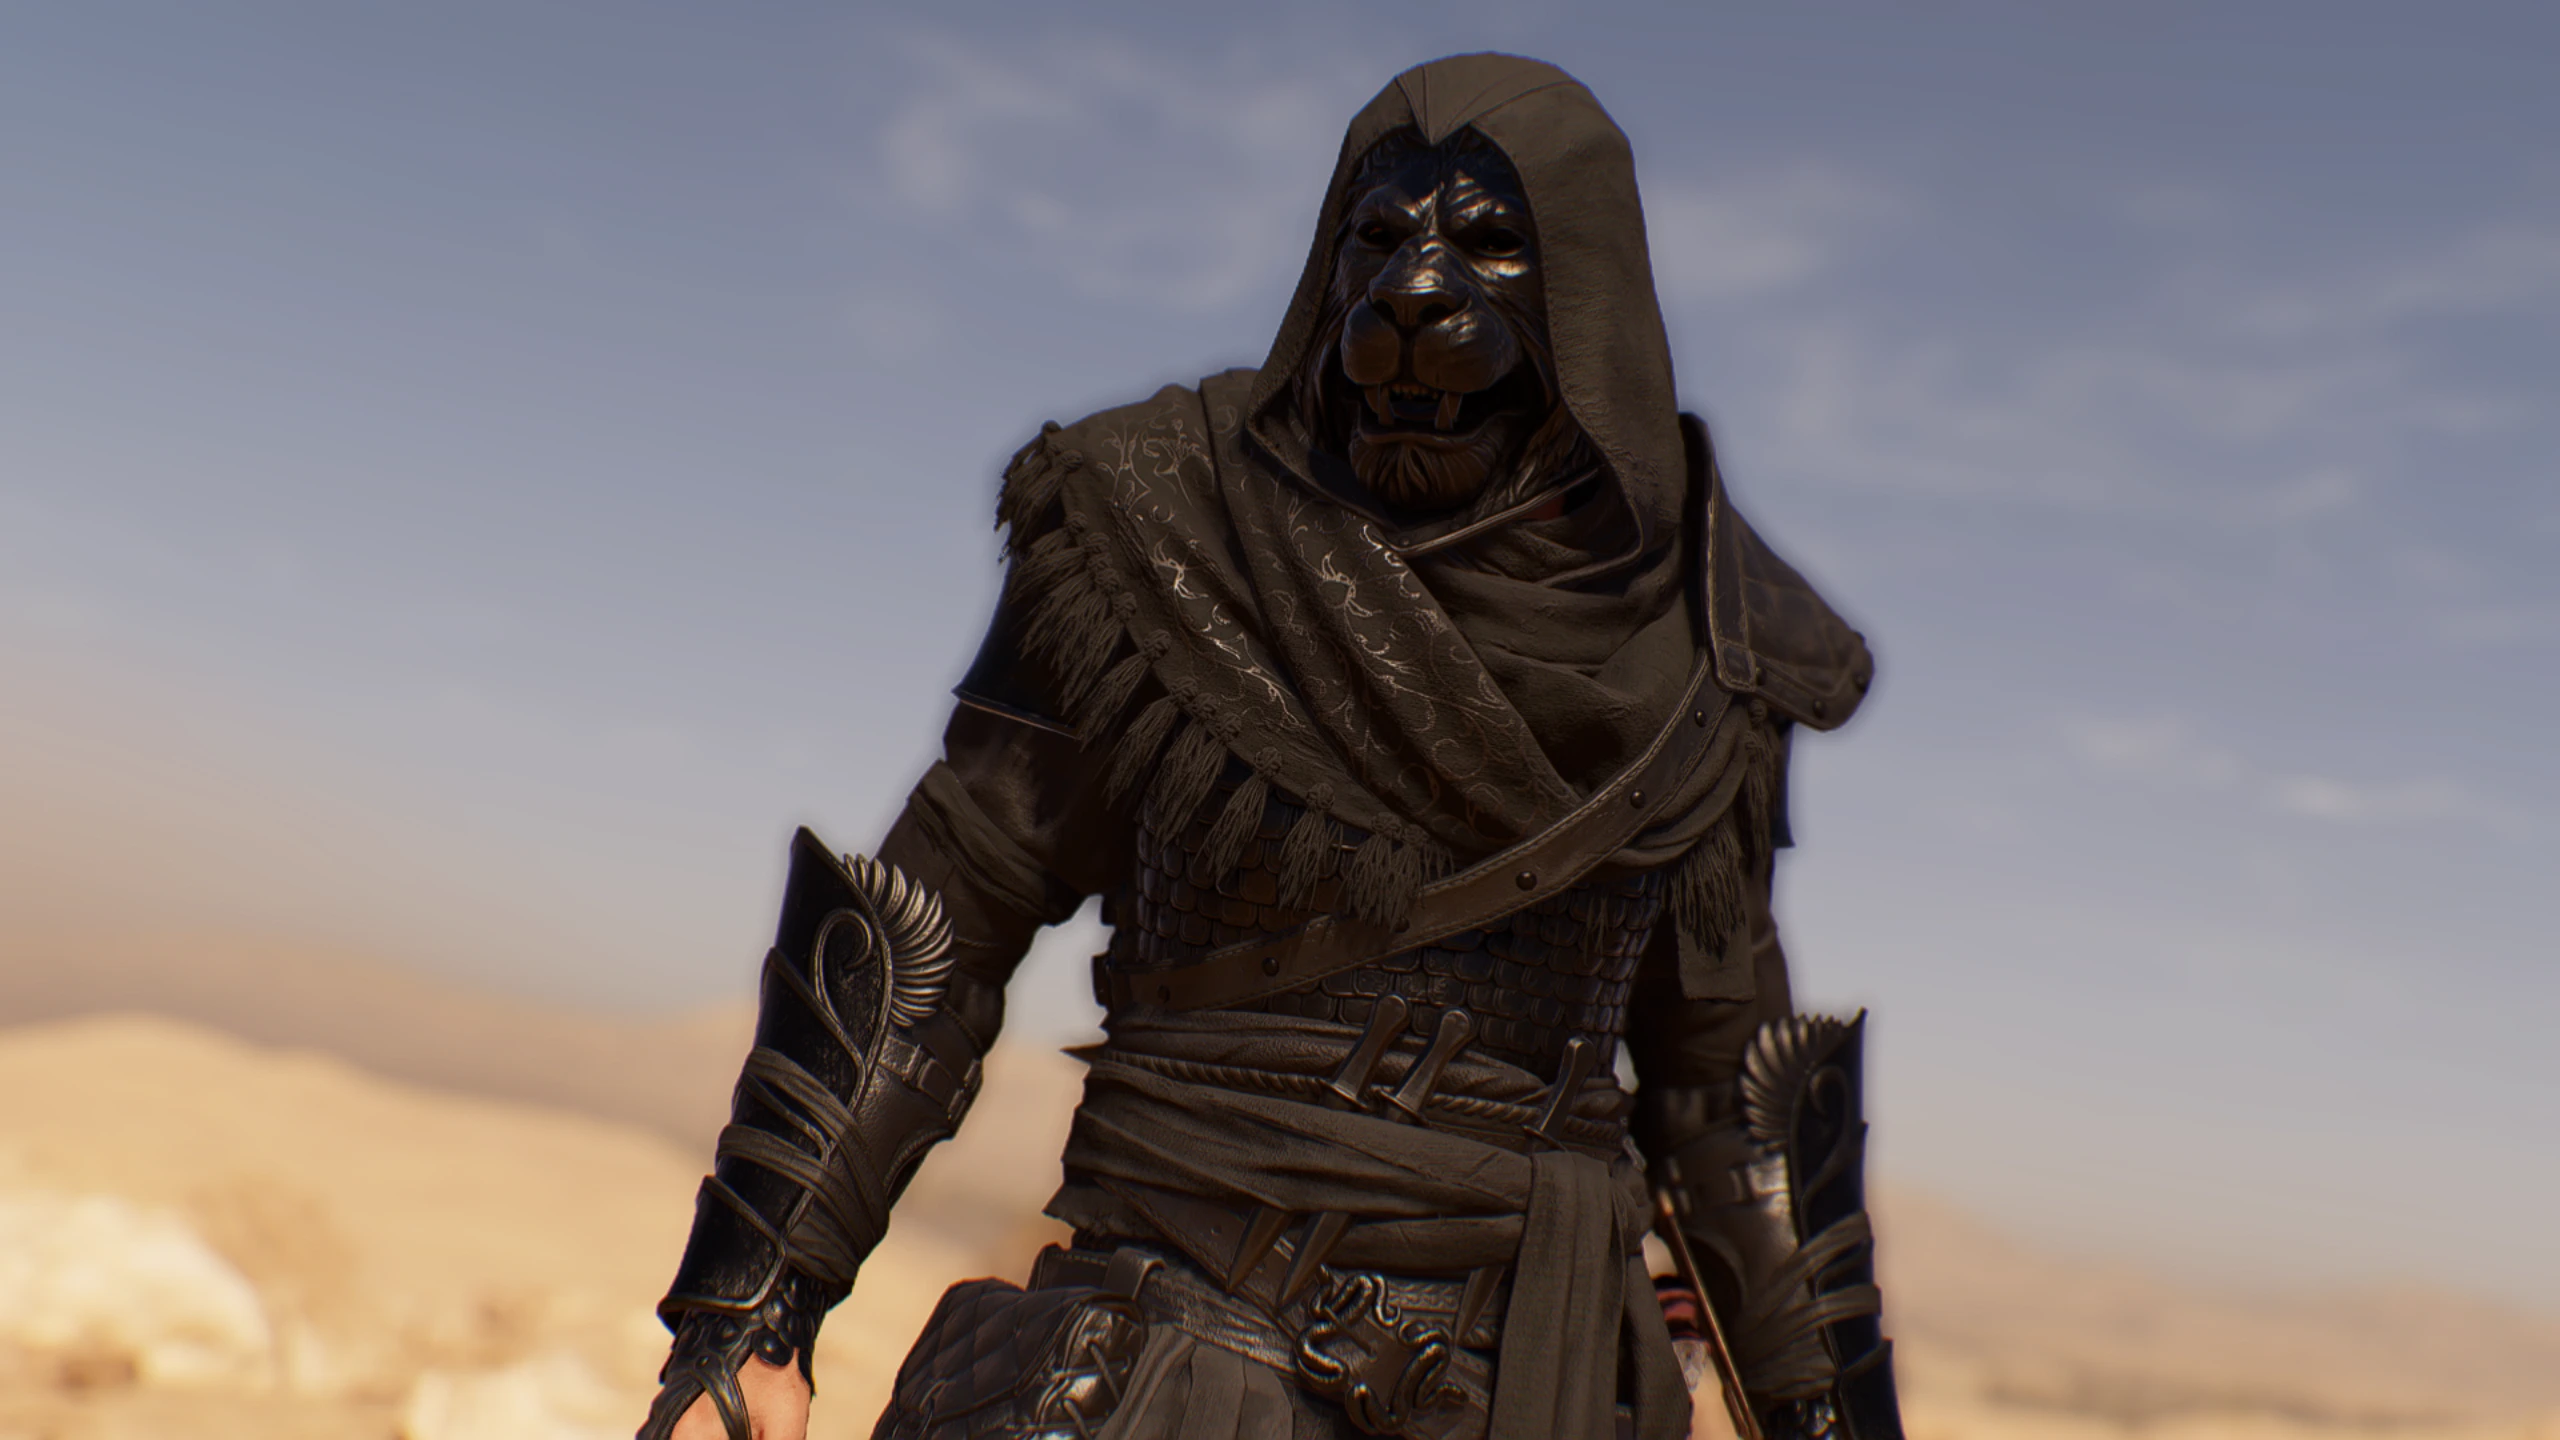 The best Assassin's Creed Mirage mods